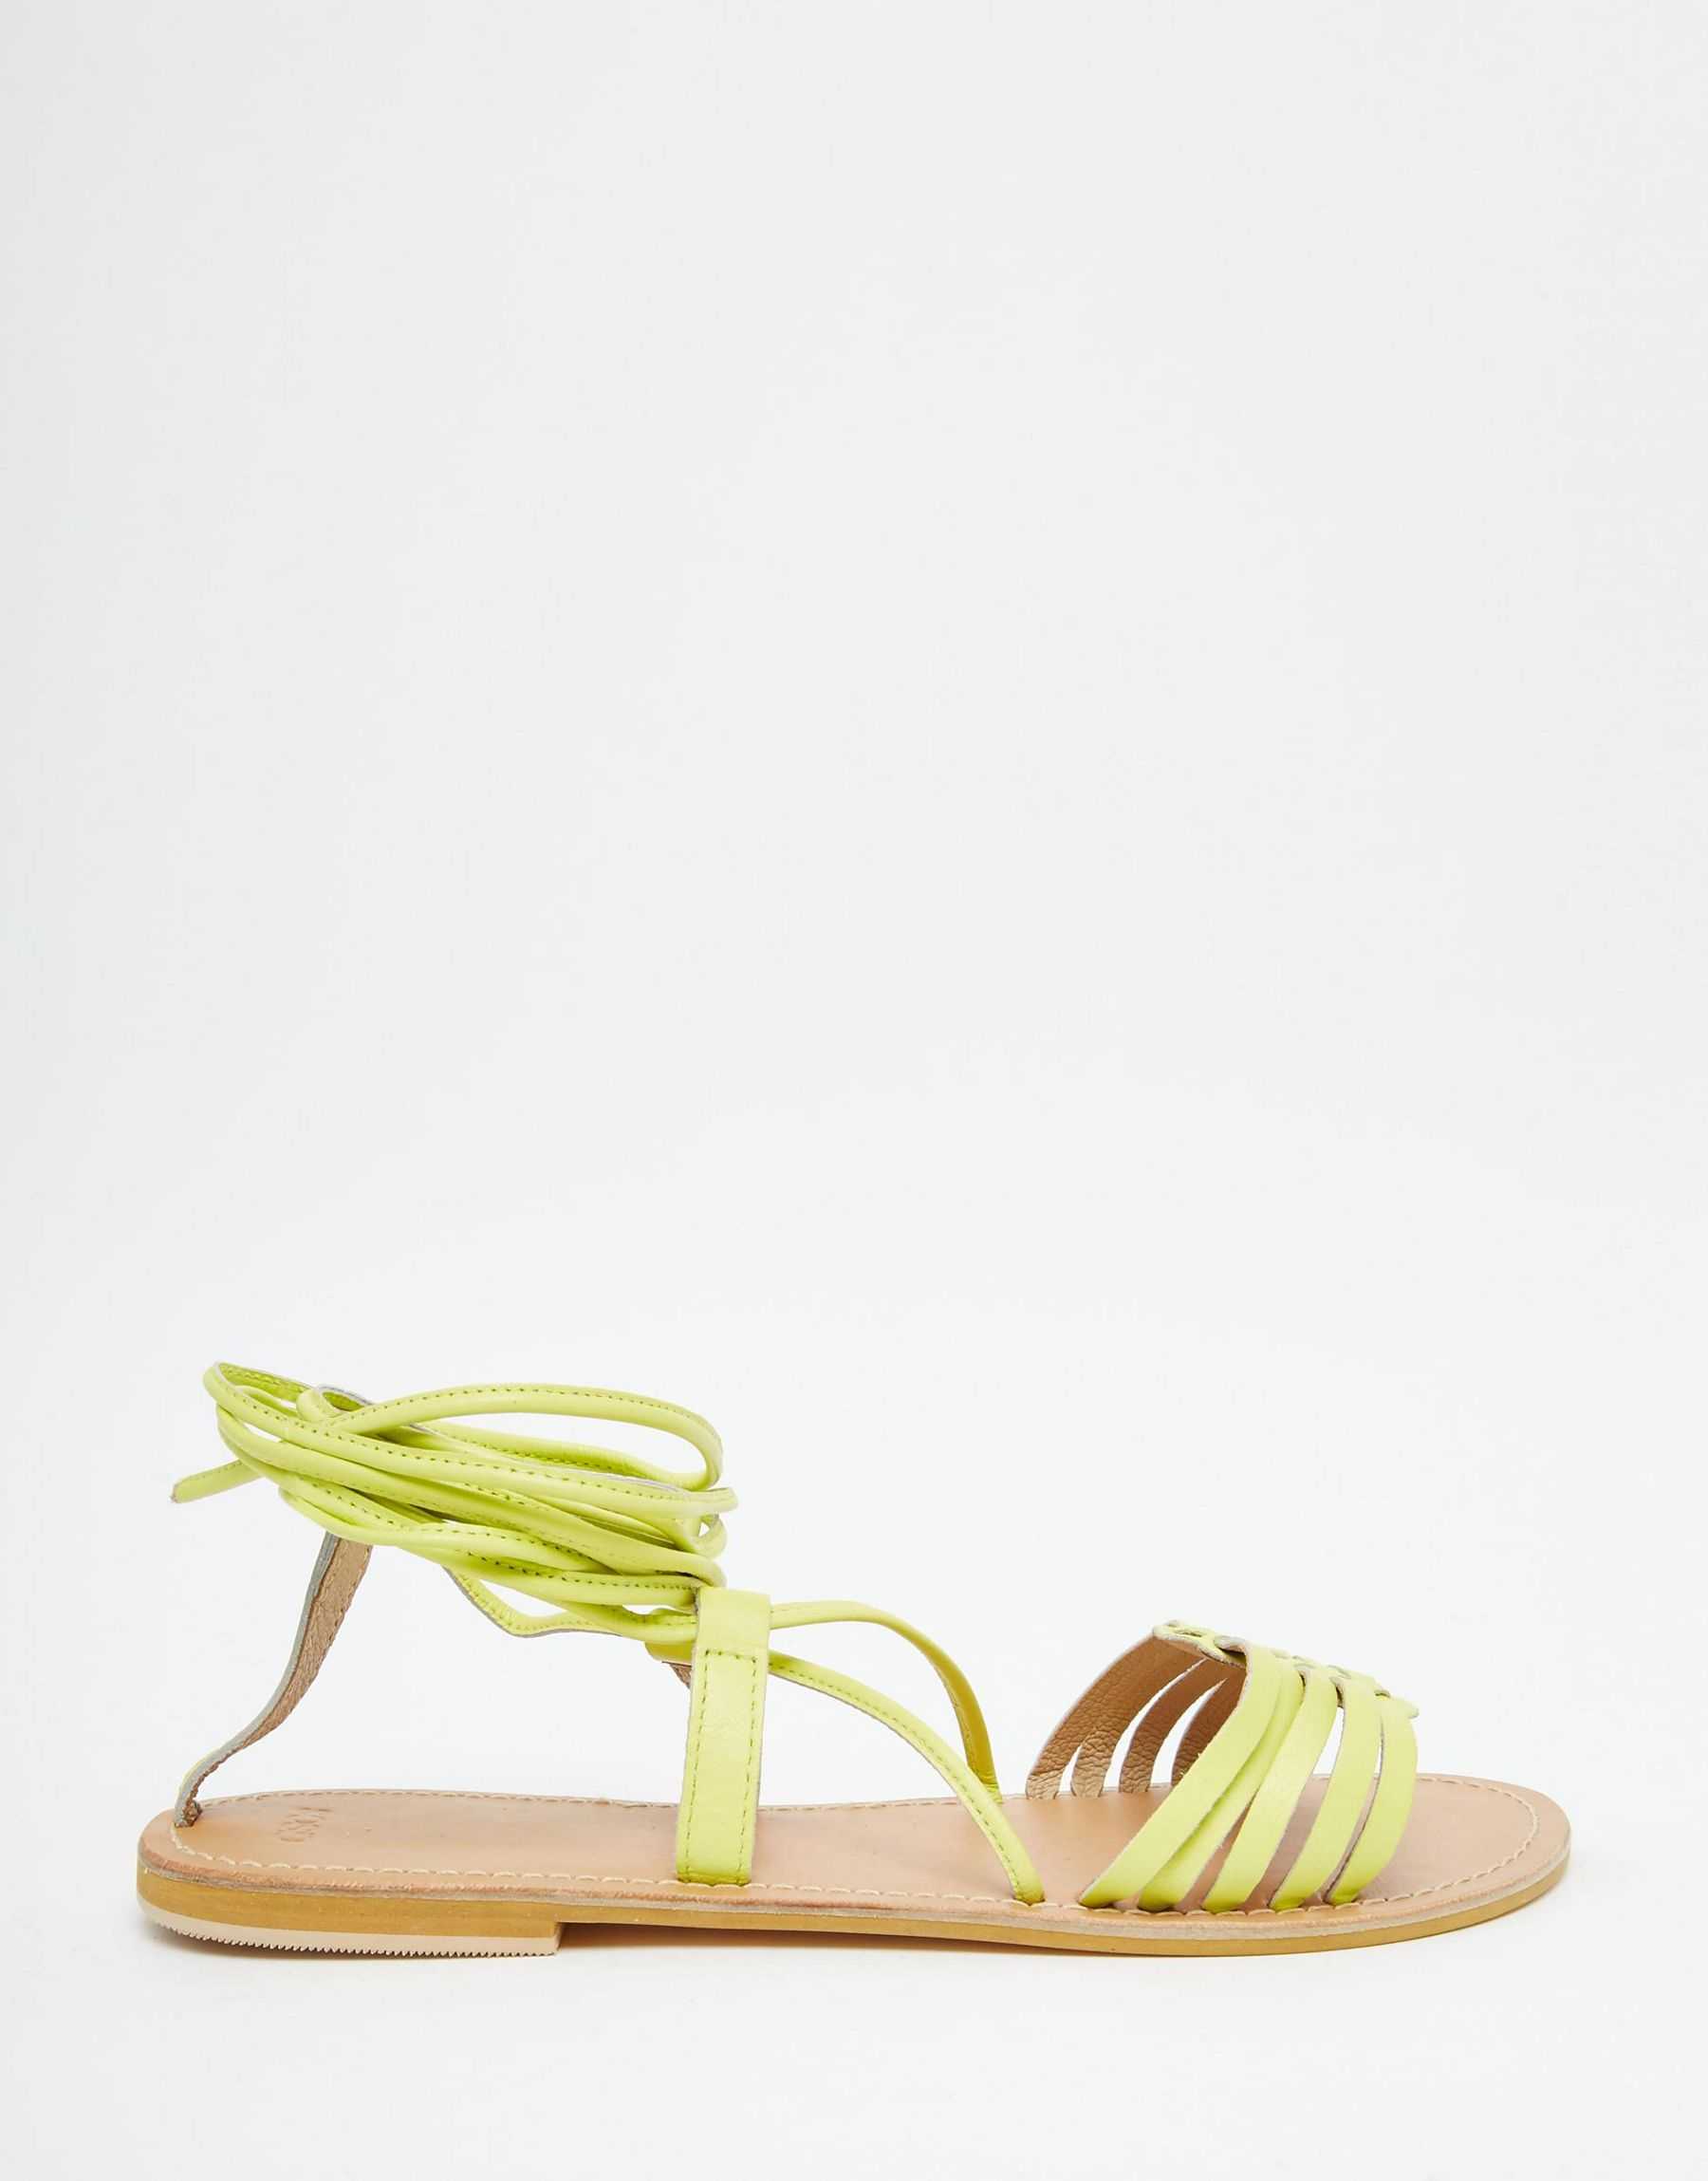 Lyst - ASOS Fraternal Wide Fit Leather Flat Sandals - Chartreuse in Green